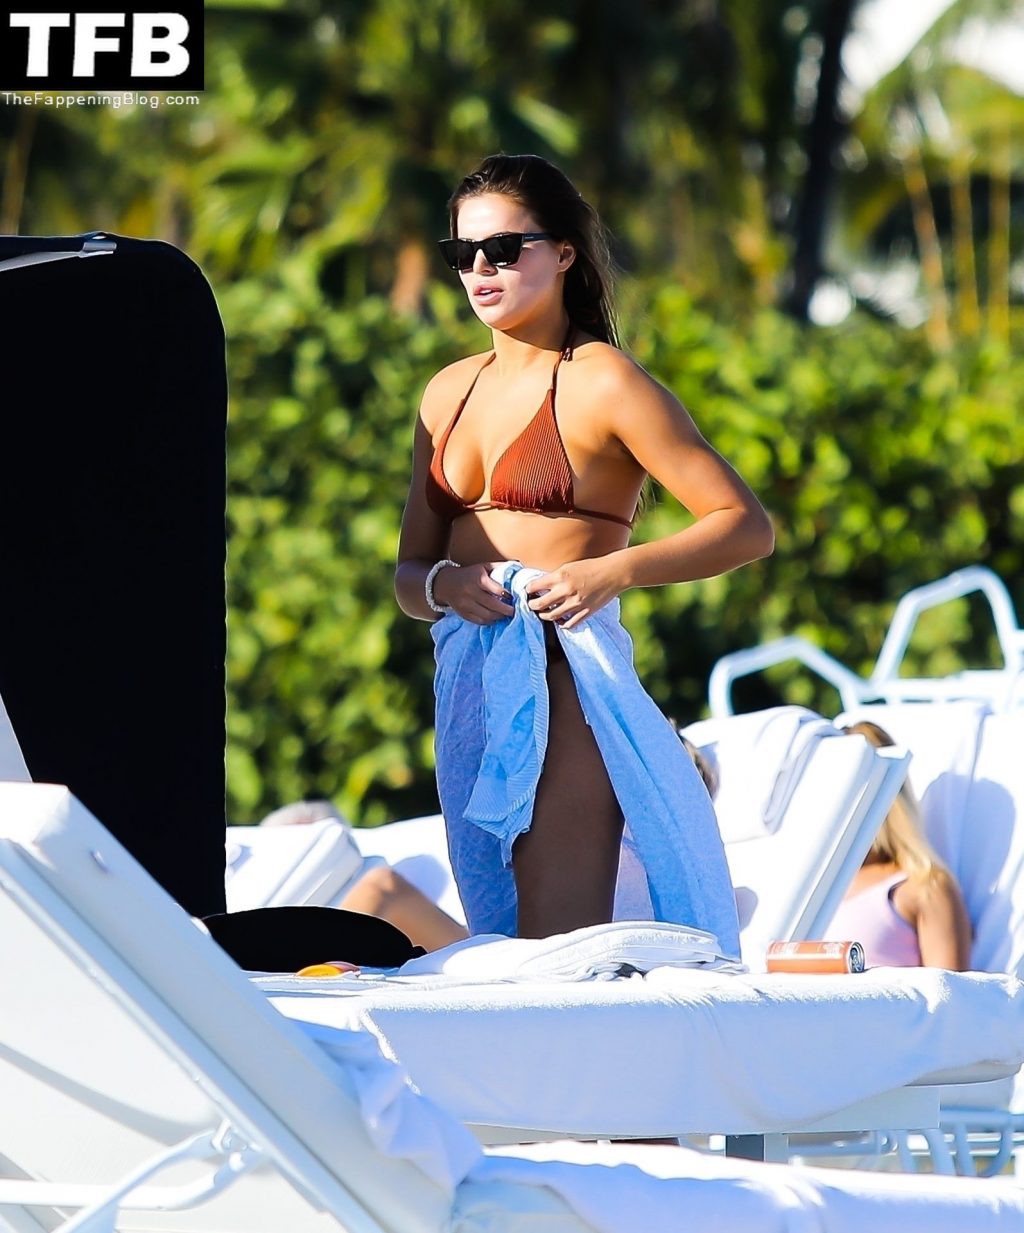 Brooks Nader Puts Her Fit Body on Full Display in Miami Beach (62 Photos)